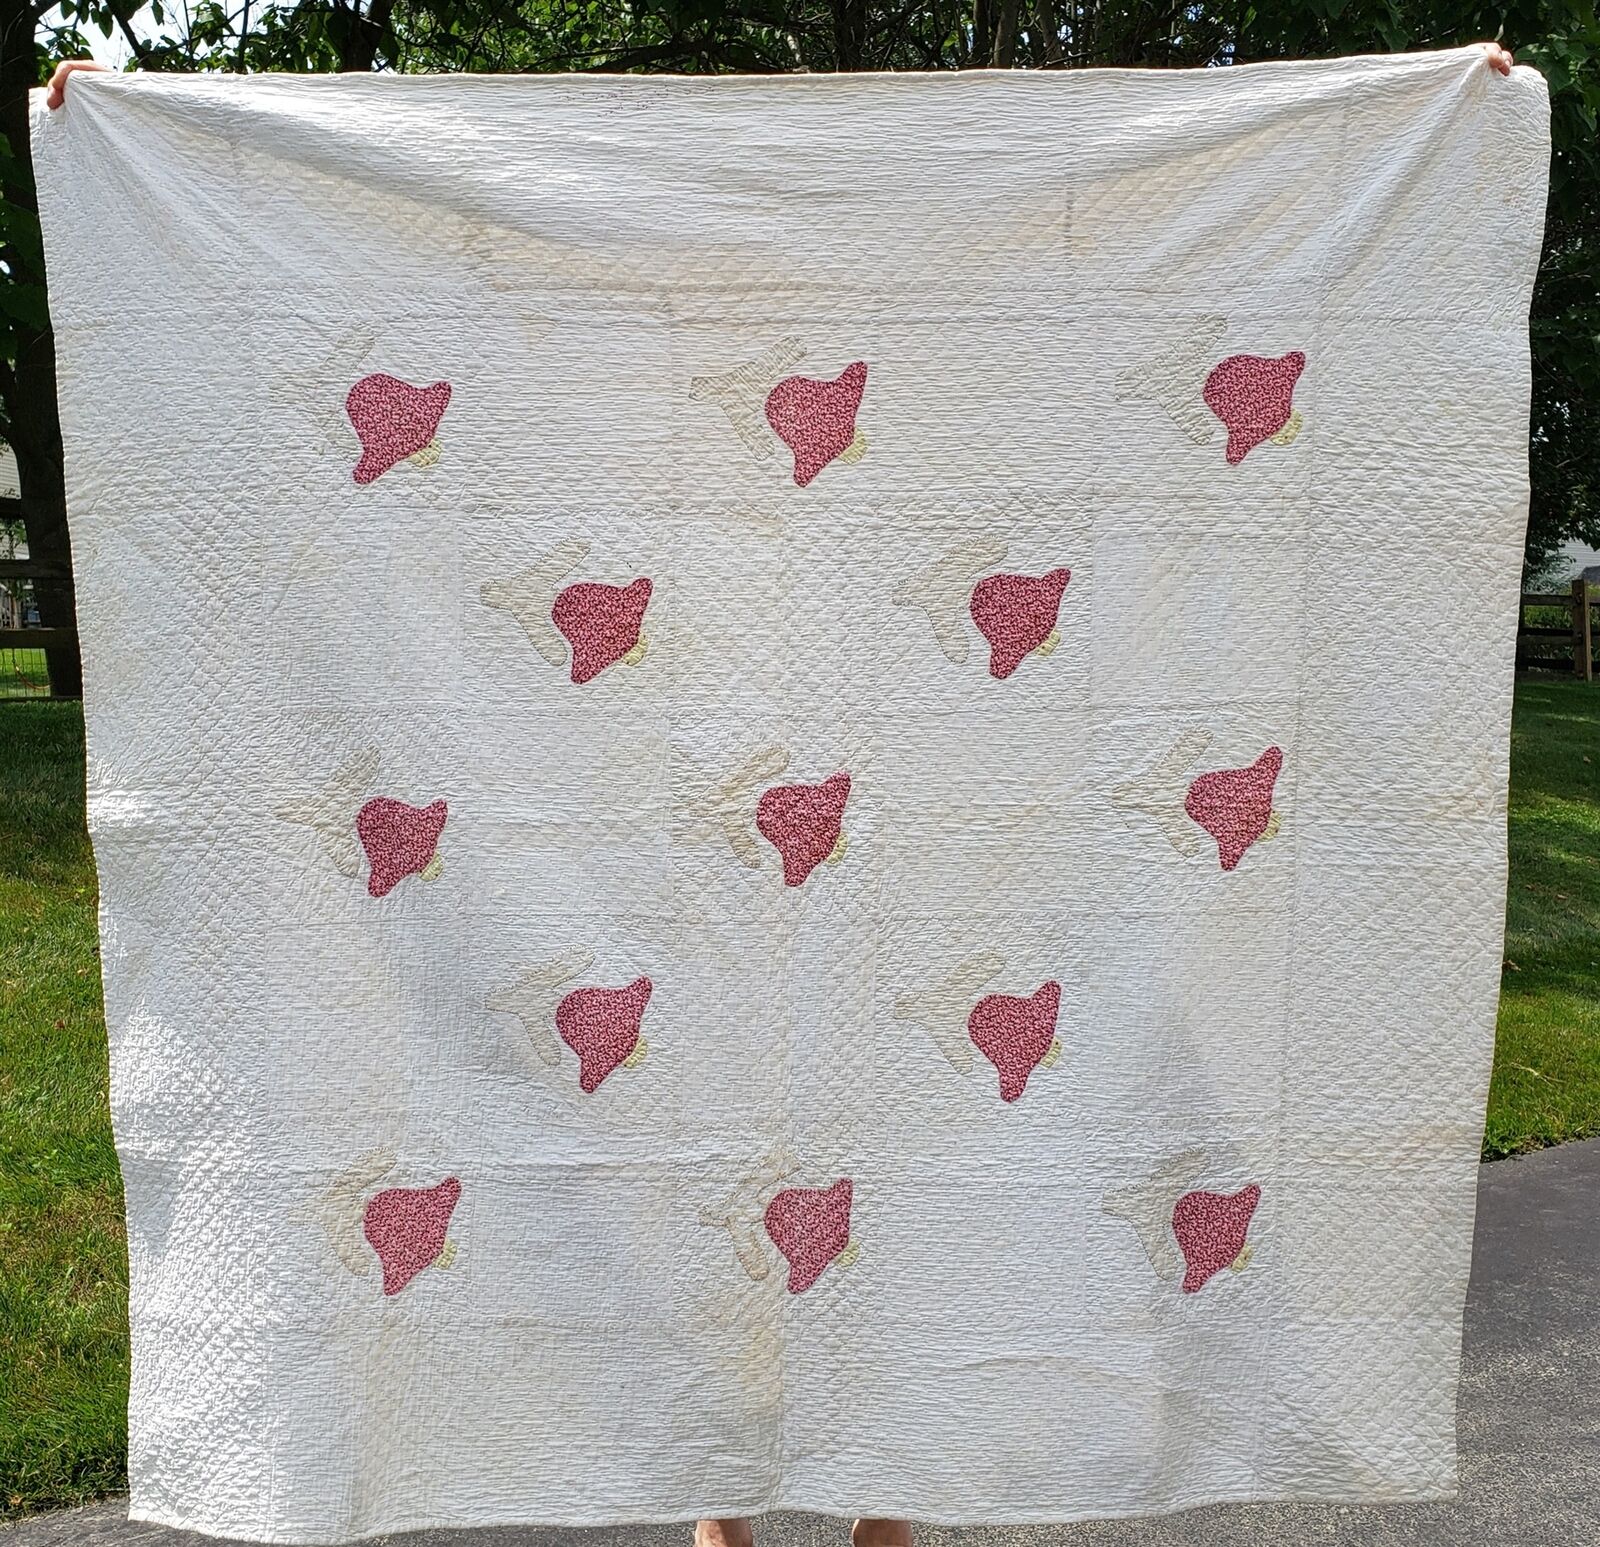 1922 antique TULIP FLORAL QUILT signed and dated Hand Stitched 58x59